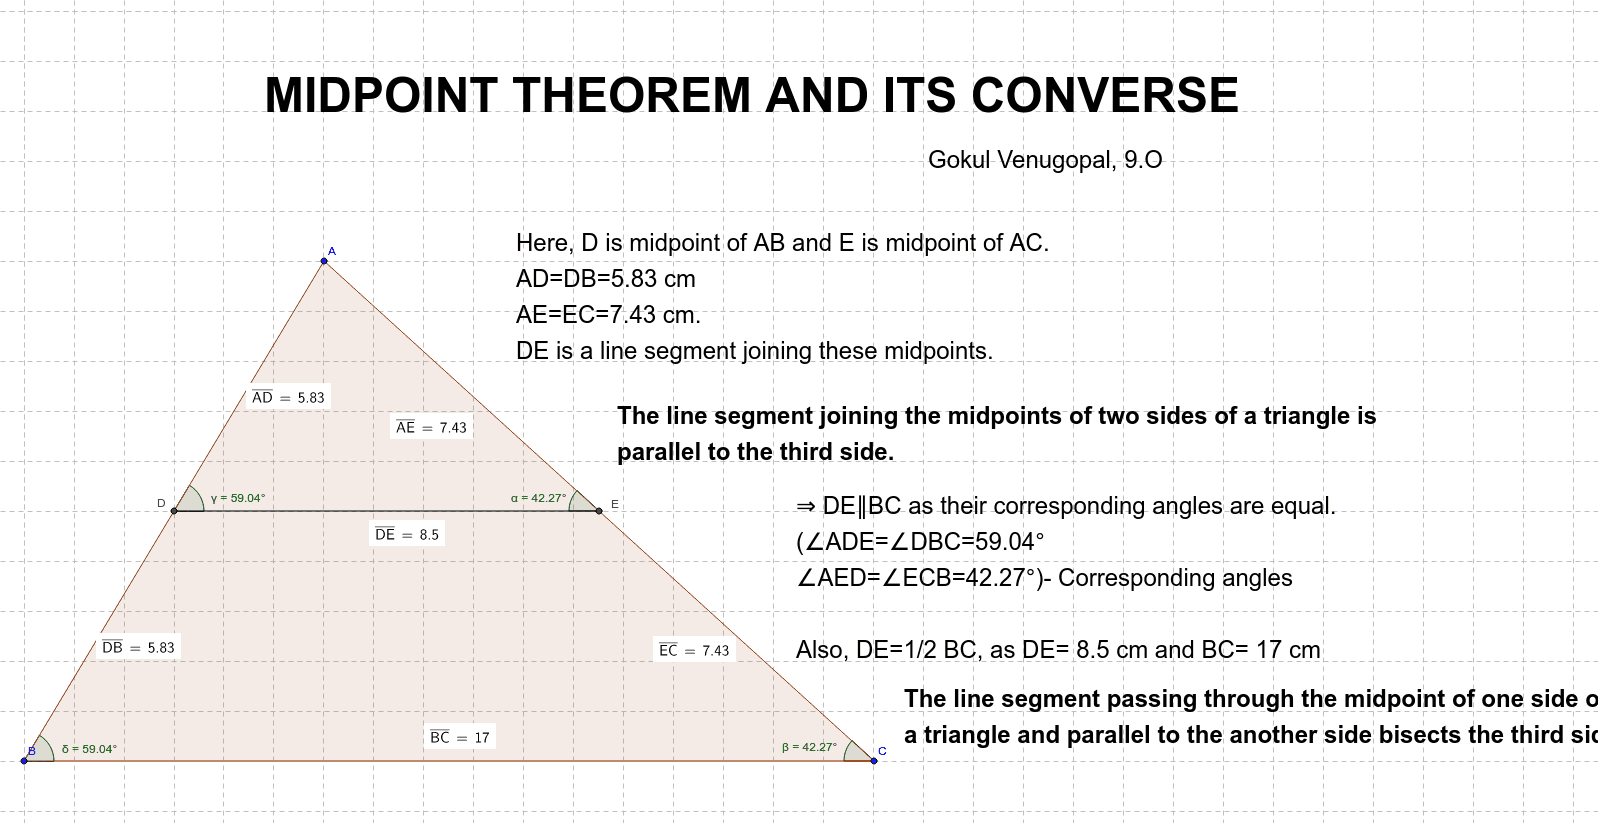 converse of midpoint theorem